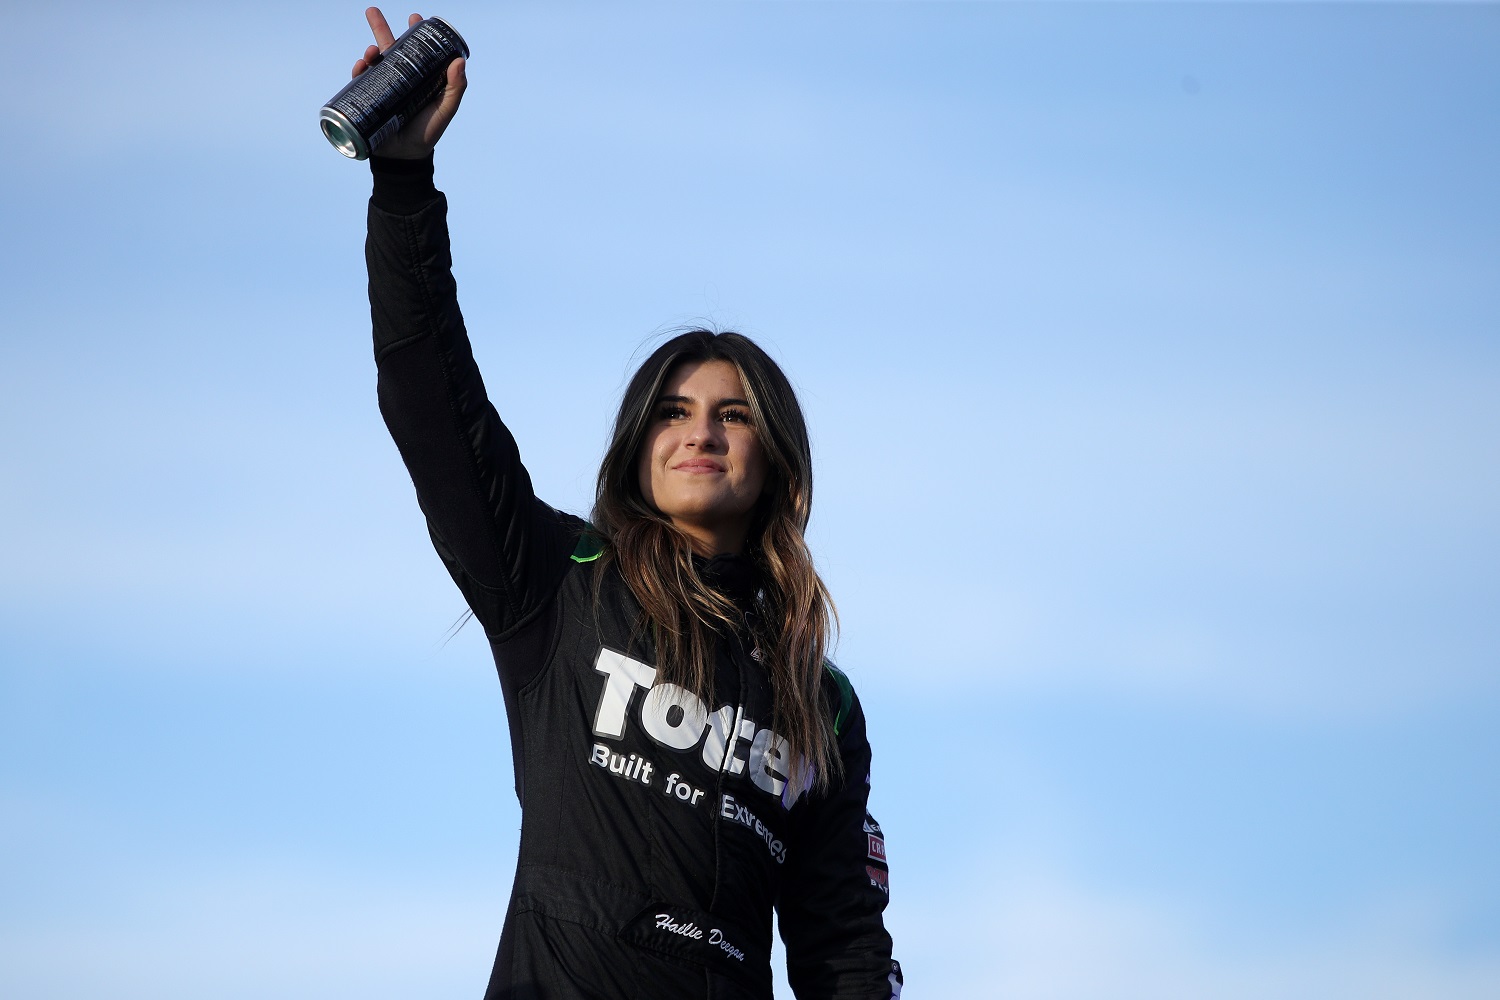 Hailie Deegan, driver of the No. 1 Ford, waves to fans during pre-race ceremonies for the NASCAR Camping World Truck Series Lucas Oil 150 at Phoenix Raceway on Nov. 5, 2021.